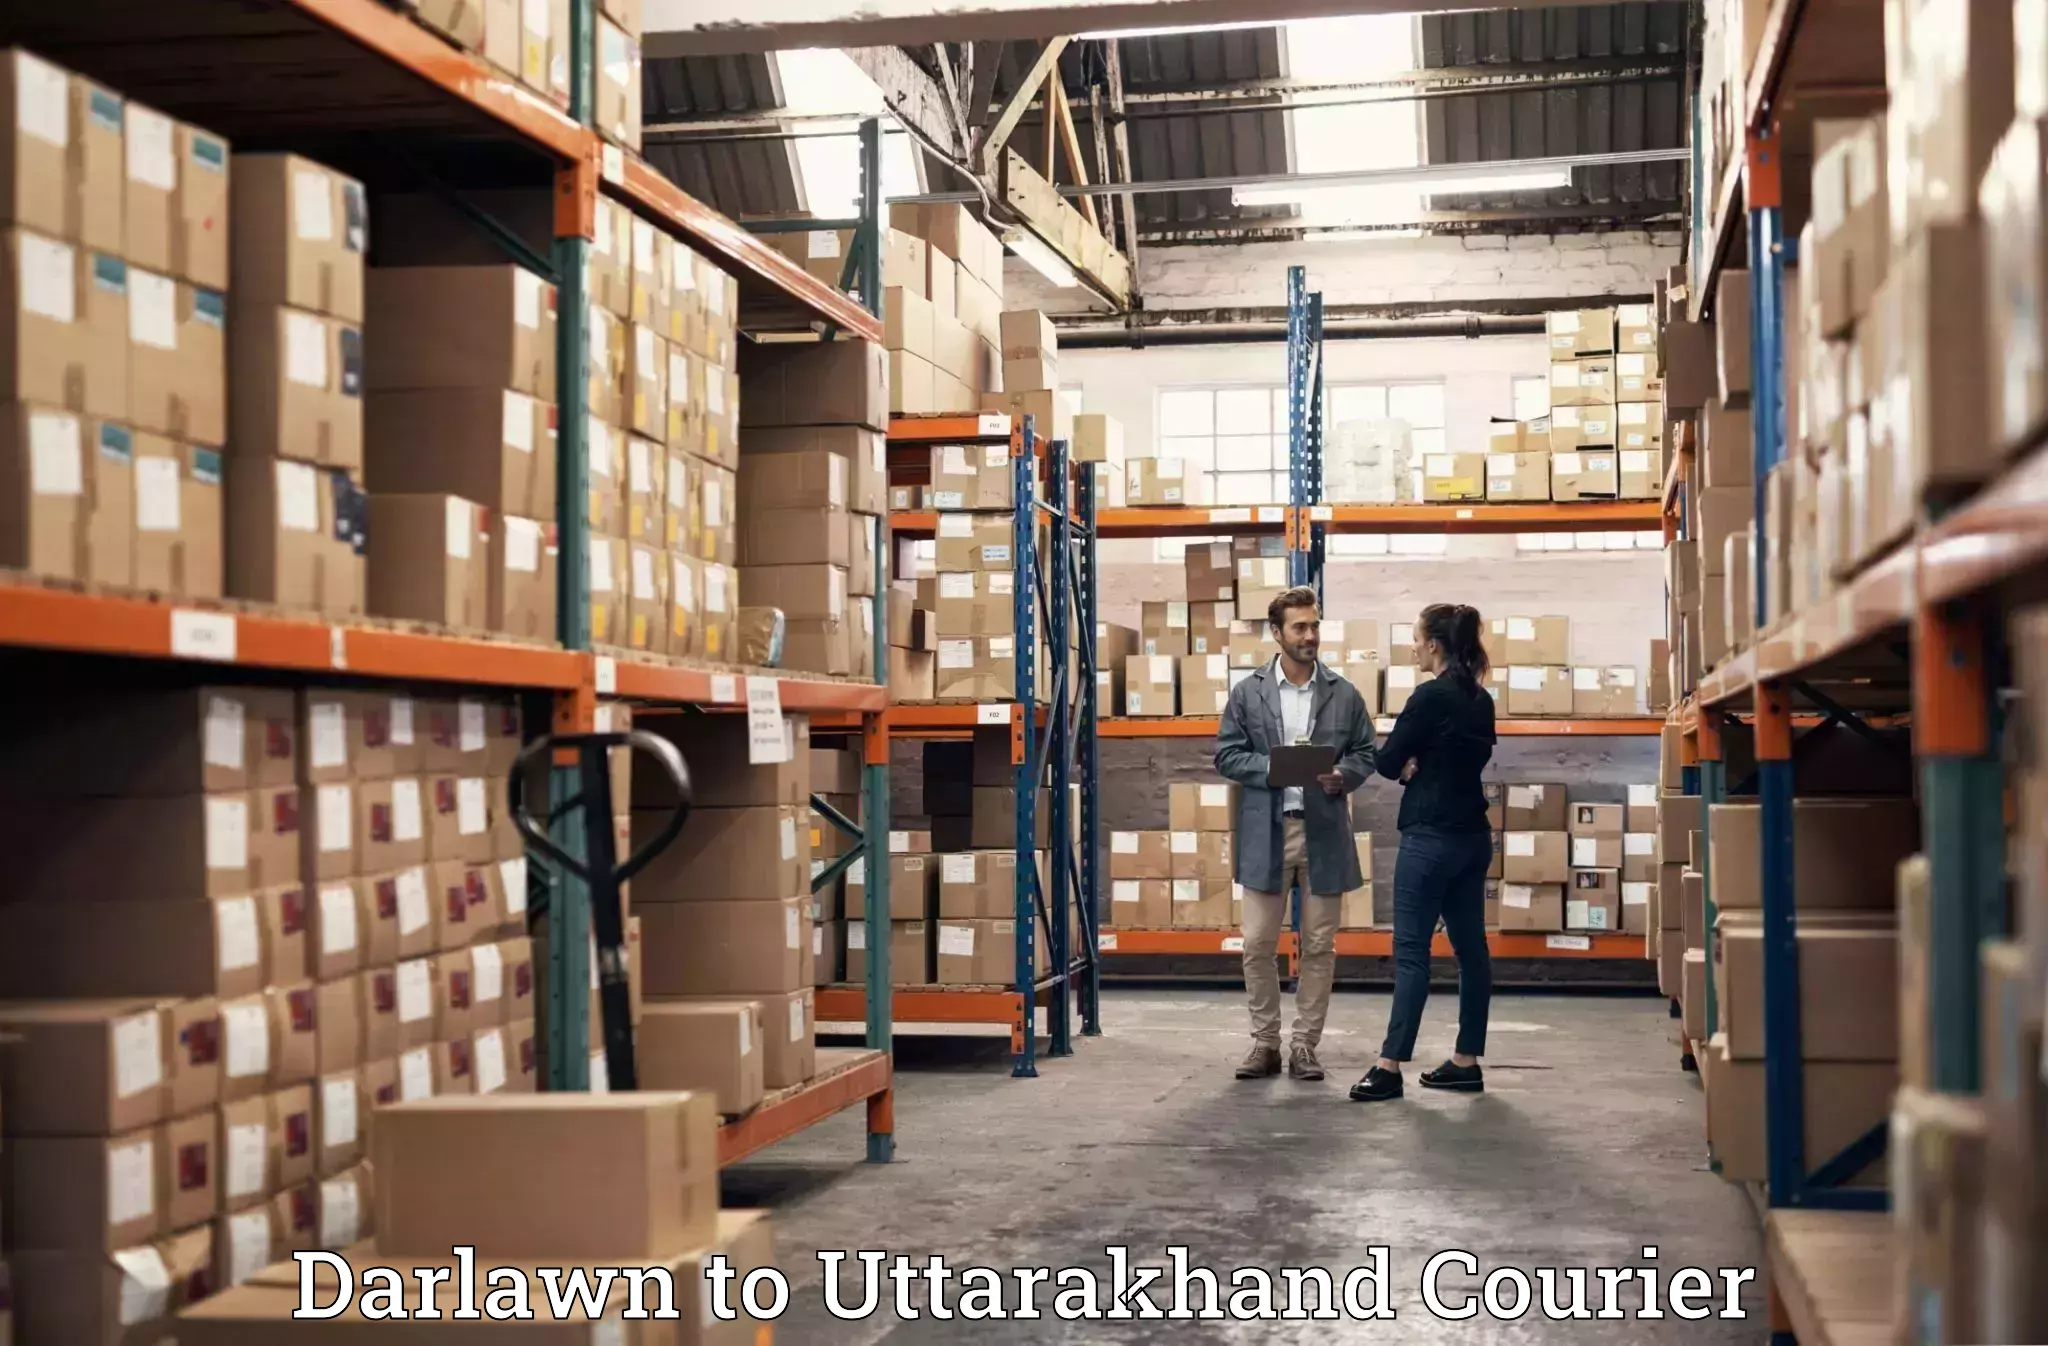 Specialized moving company in Darlawn to Doiwala